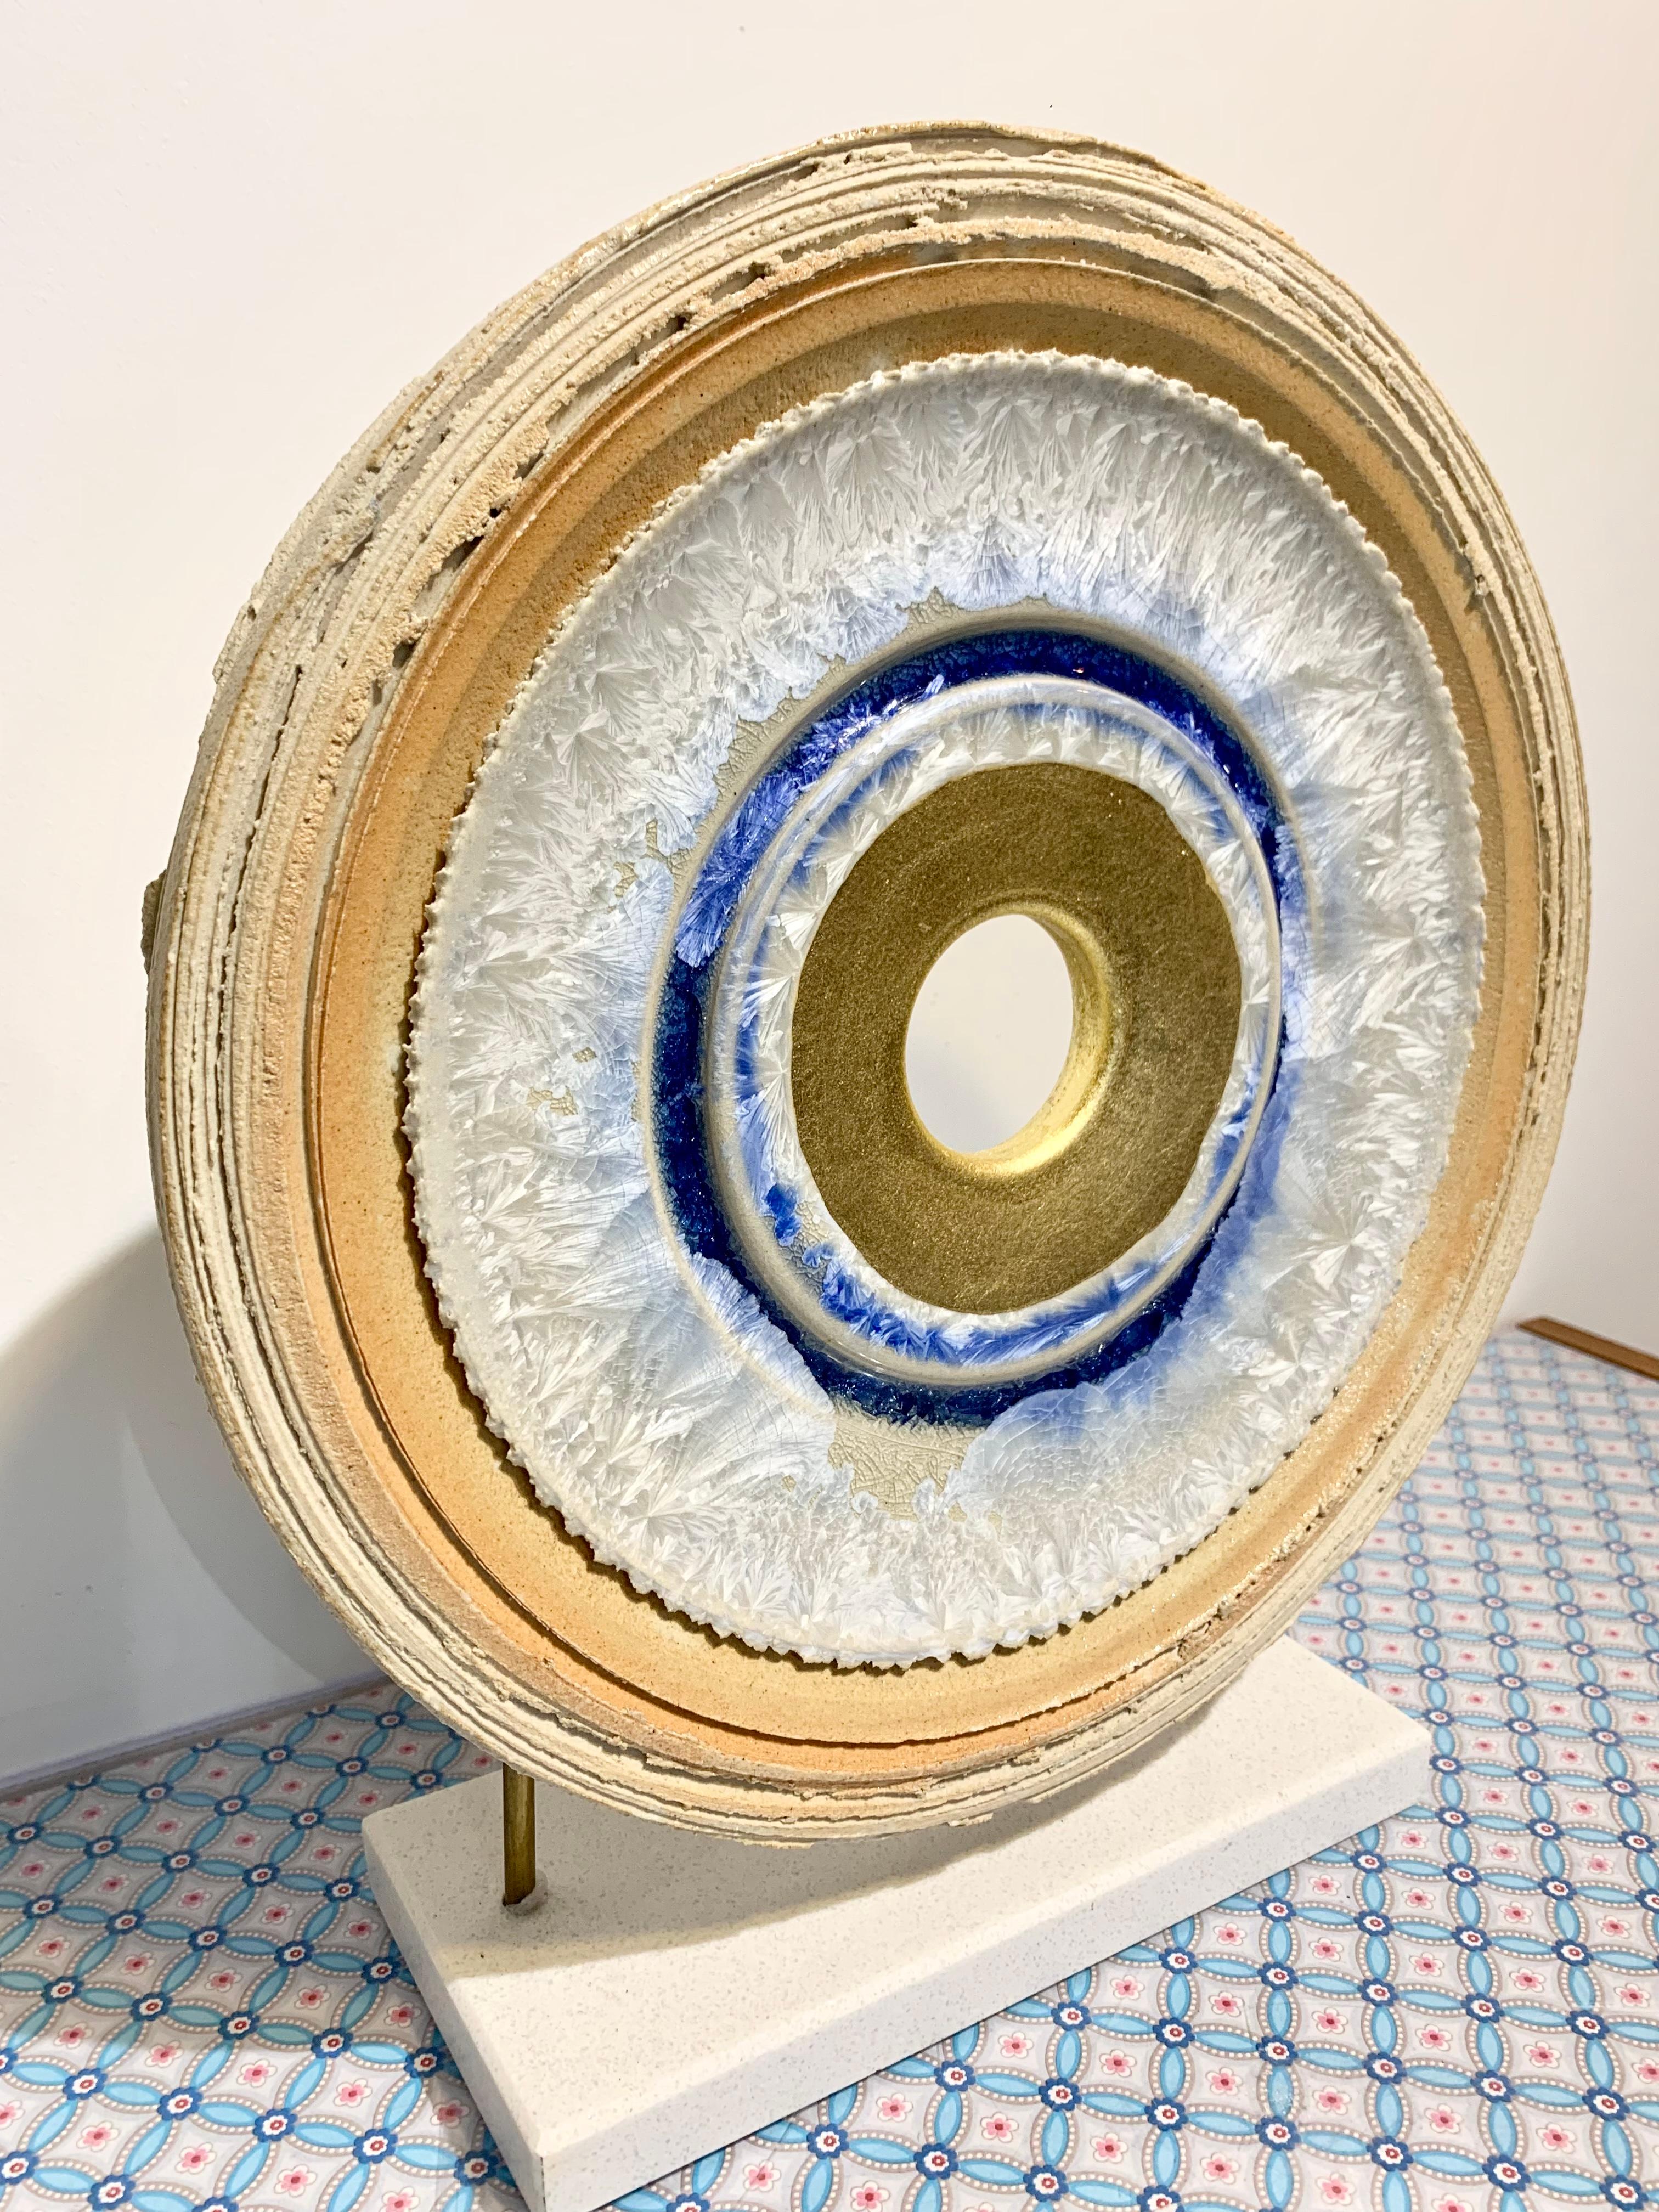 Ice Blue Creatio Continua by Kuno Vollet - gold, blue circular ceramic sculpture For Sale 7